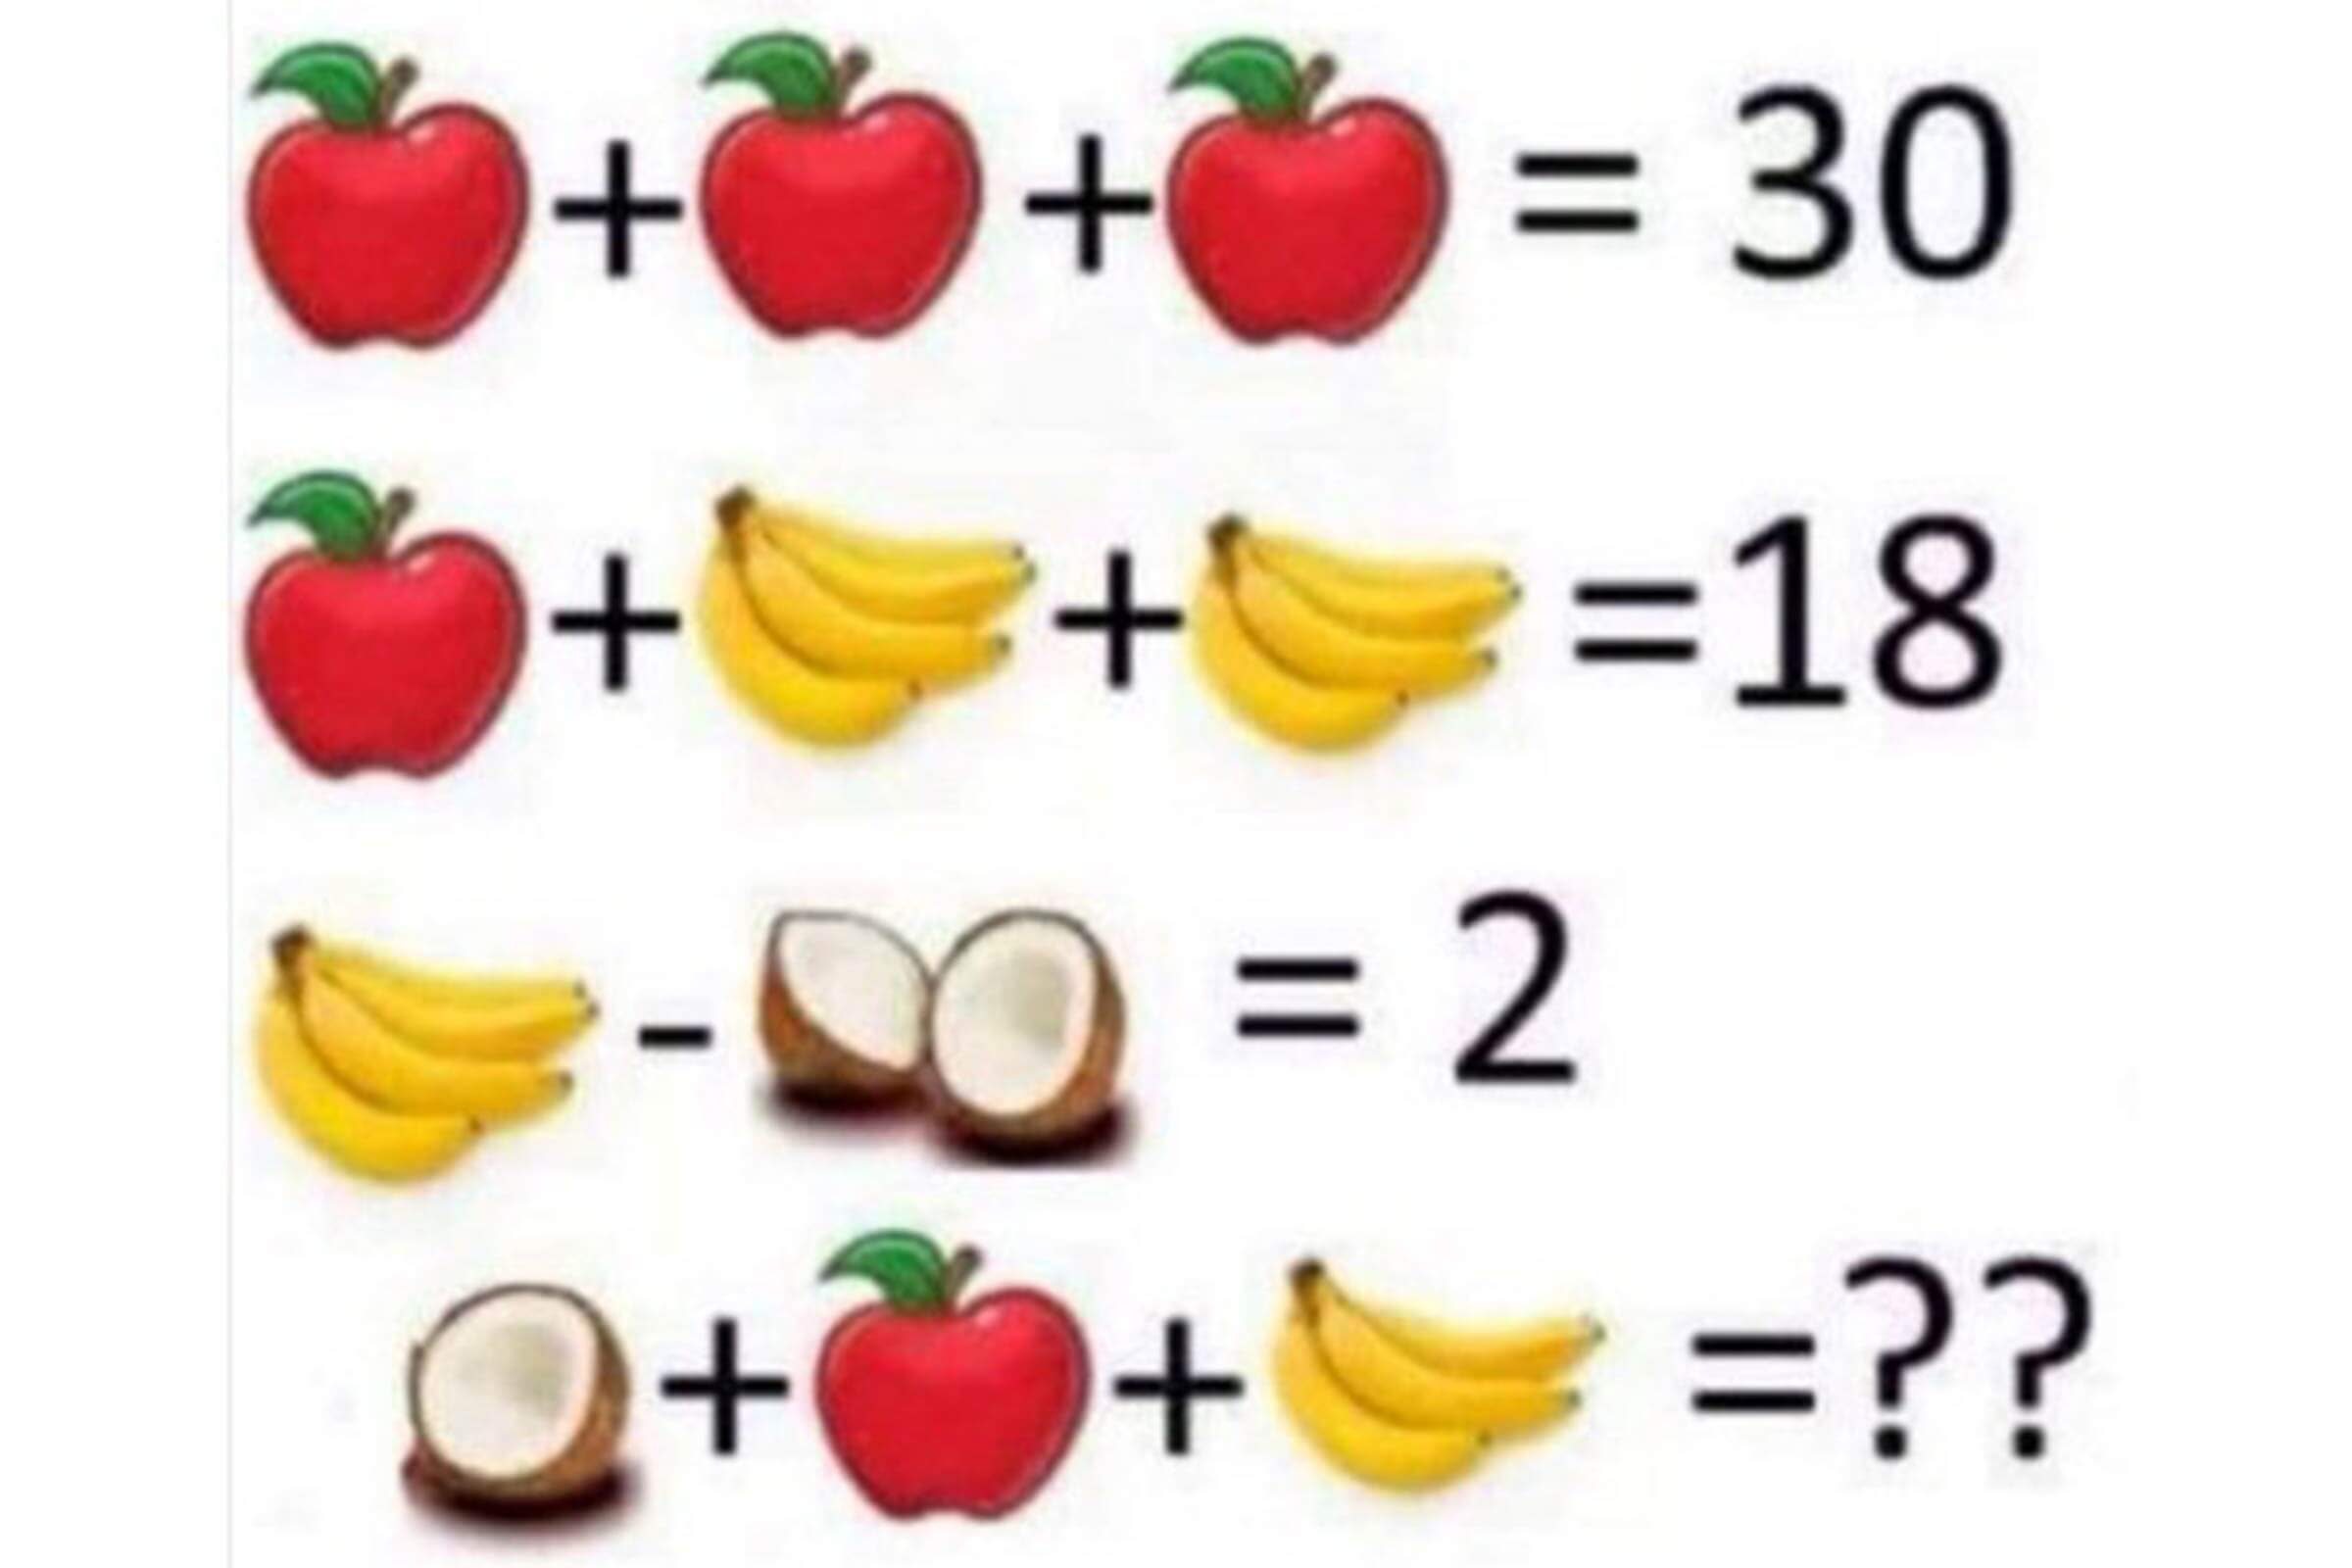 This “Simple” Math Puzzle for Children Has Stumped the Internet ...